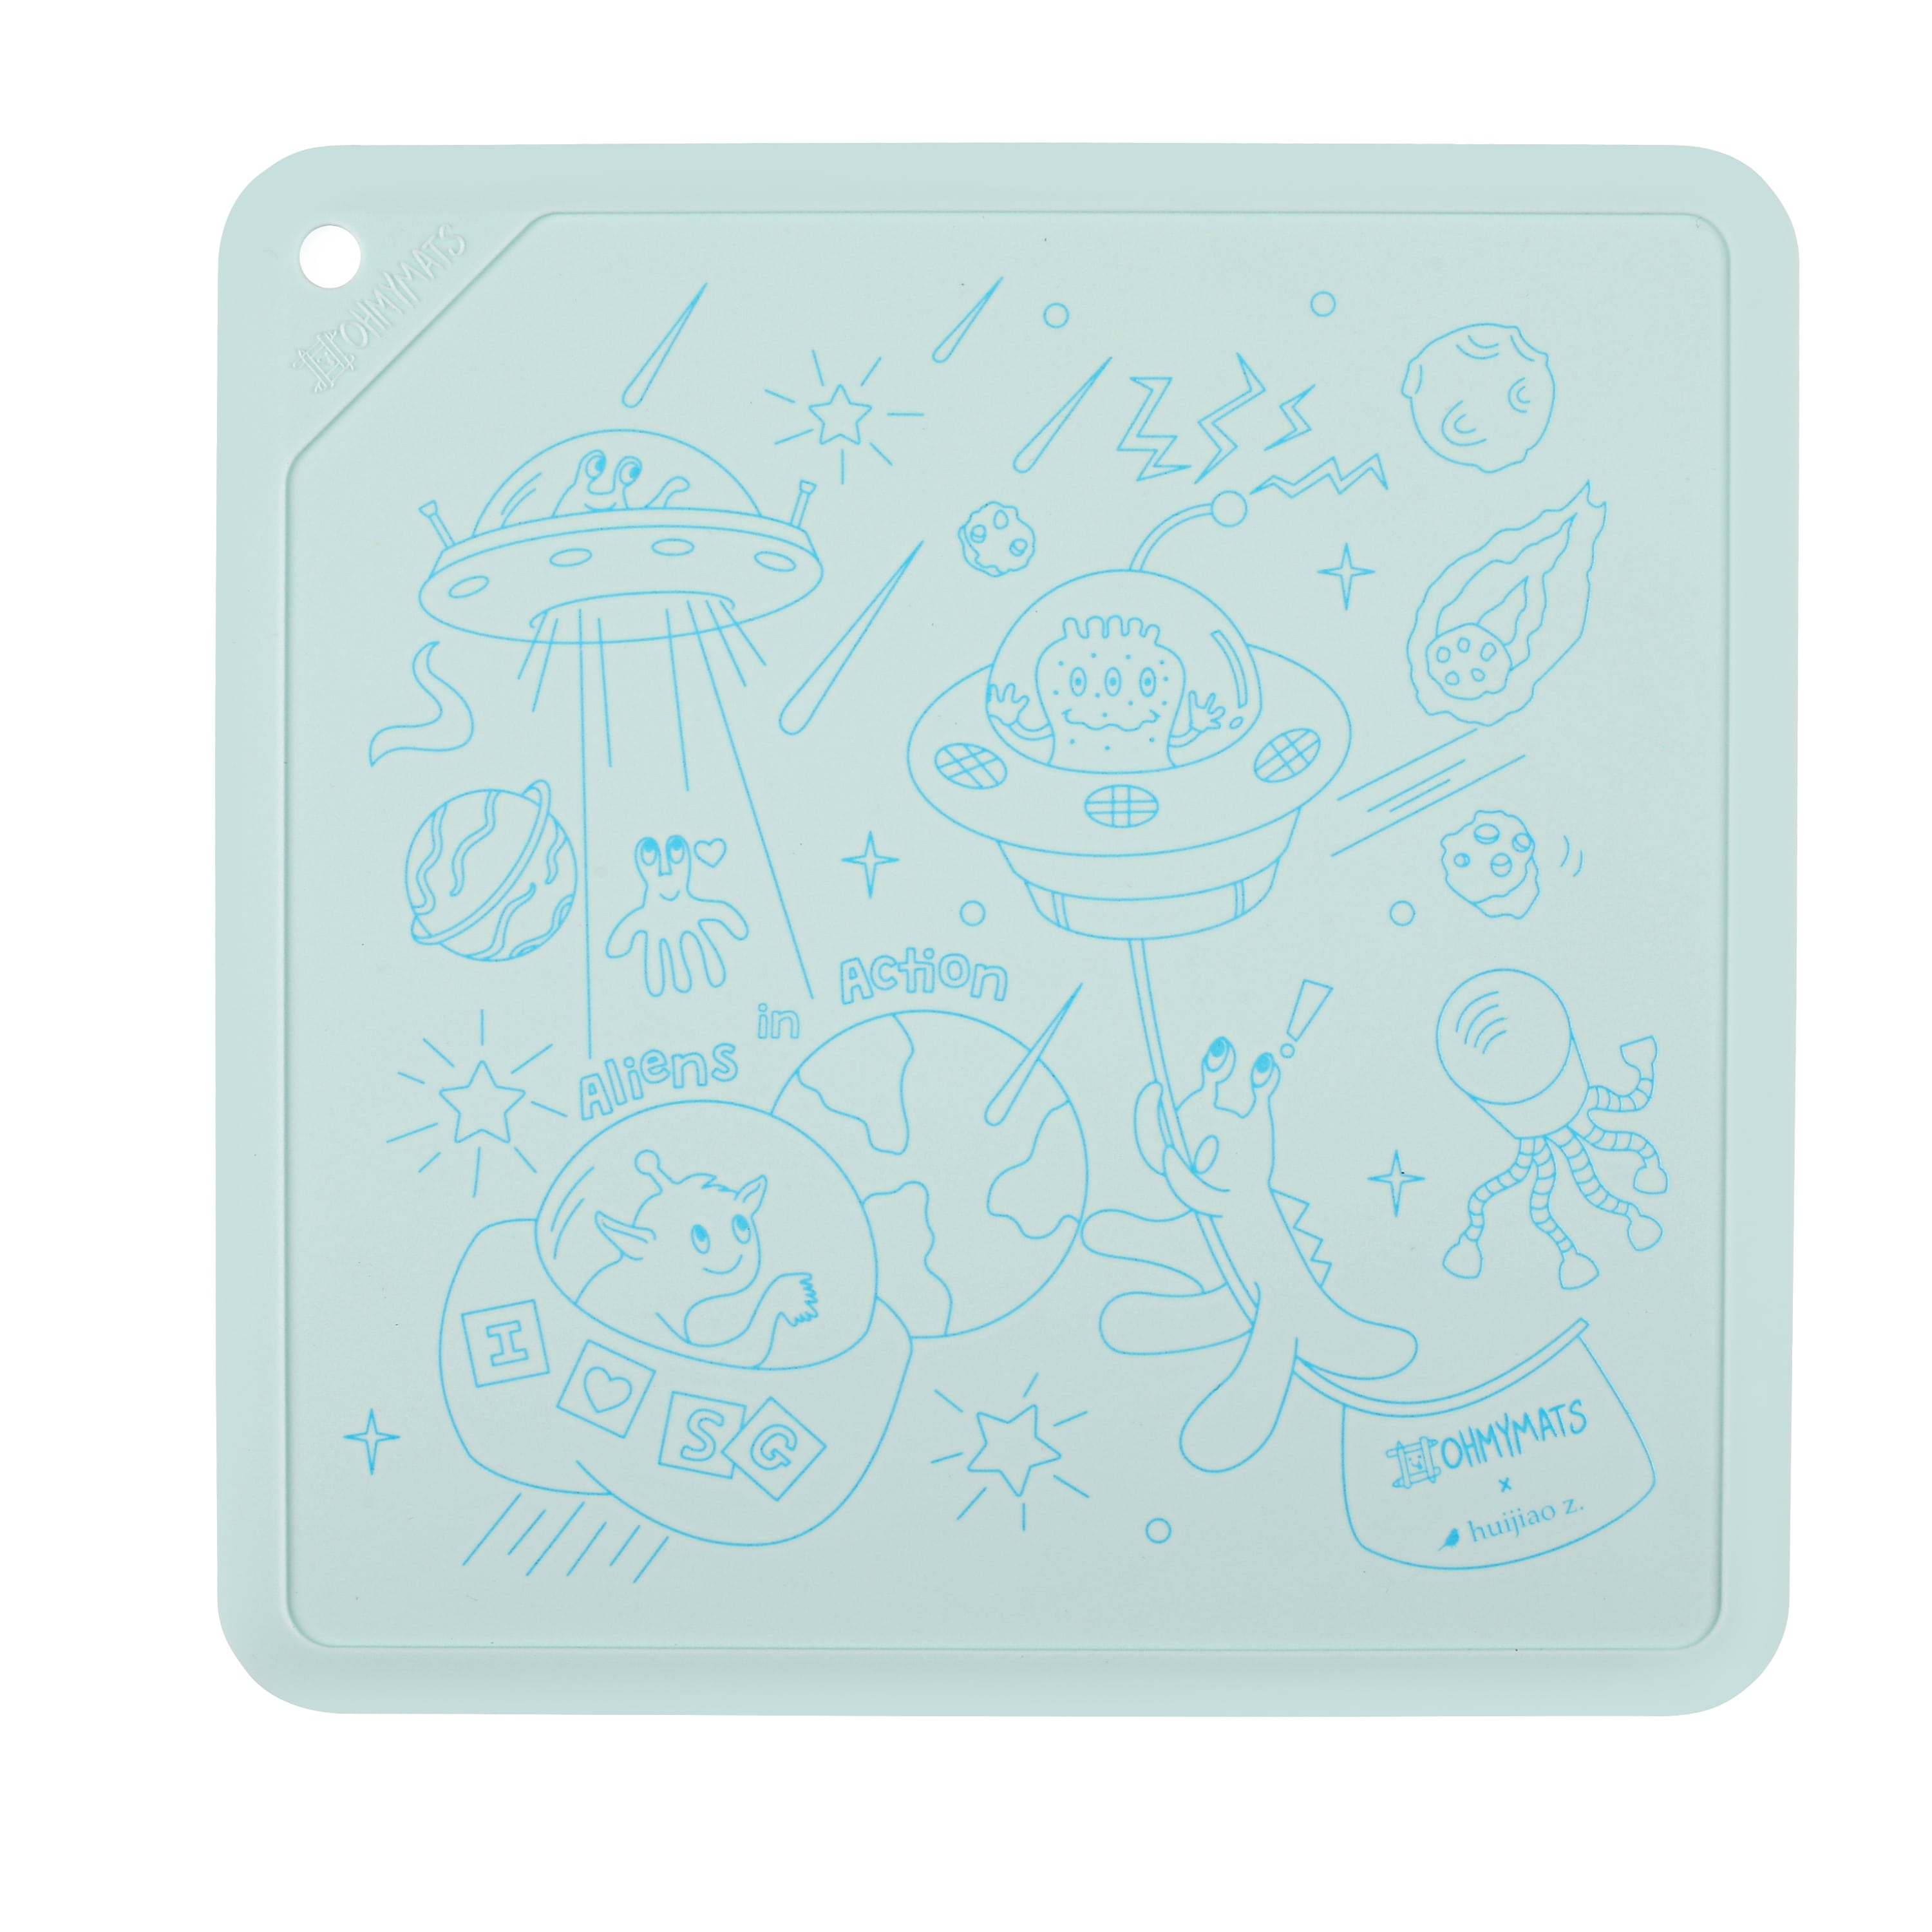 #ohmymats Square Mats - The Blue Series - Aliens in Action